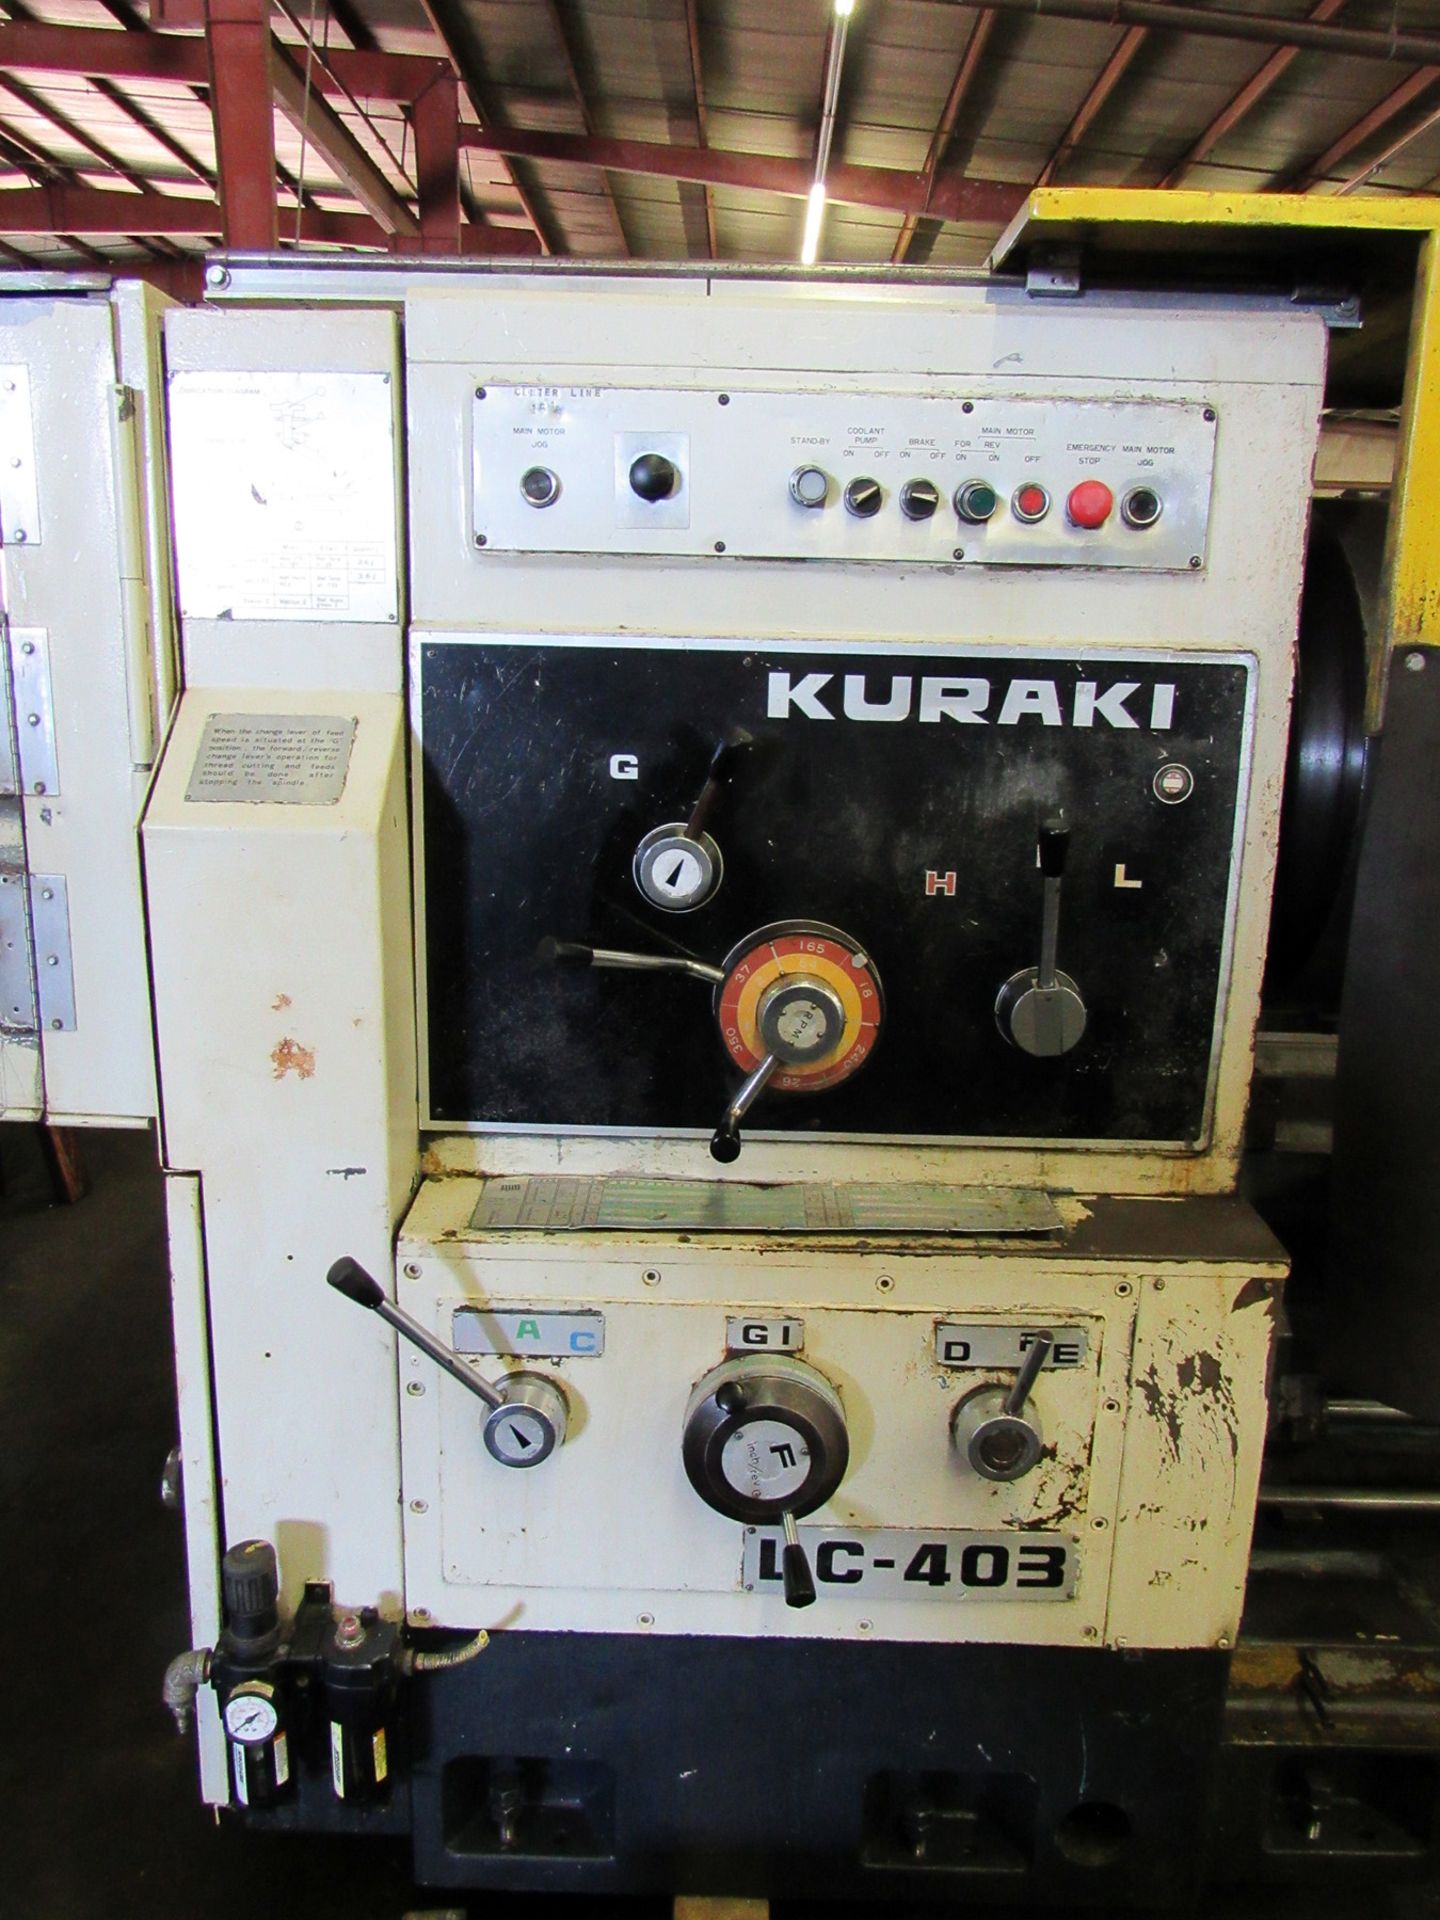 32" X 118" KURAKI MODEL LC-403 30 HOLLOW SPINDLE LATHE WITH 12.5" SPINDLE BORE - Image 5 of 19